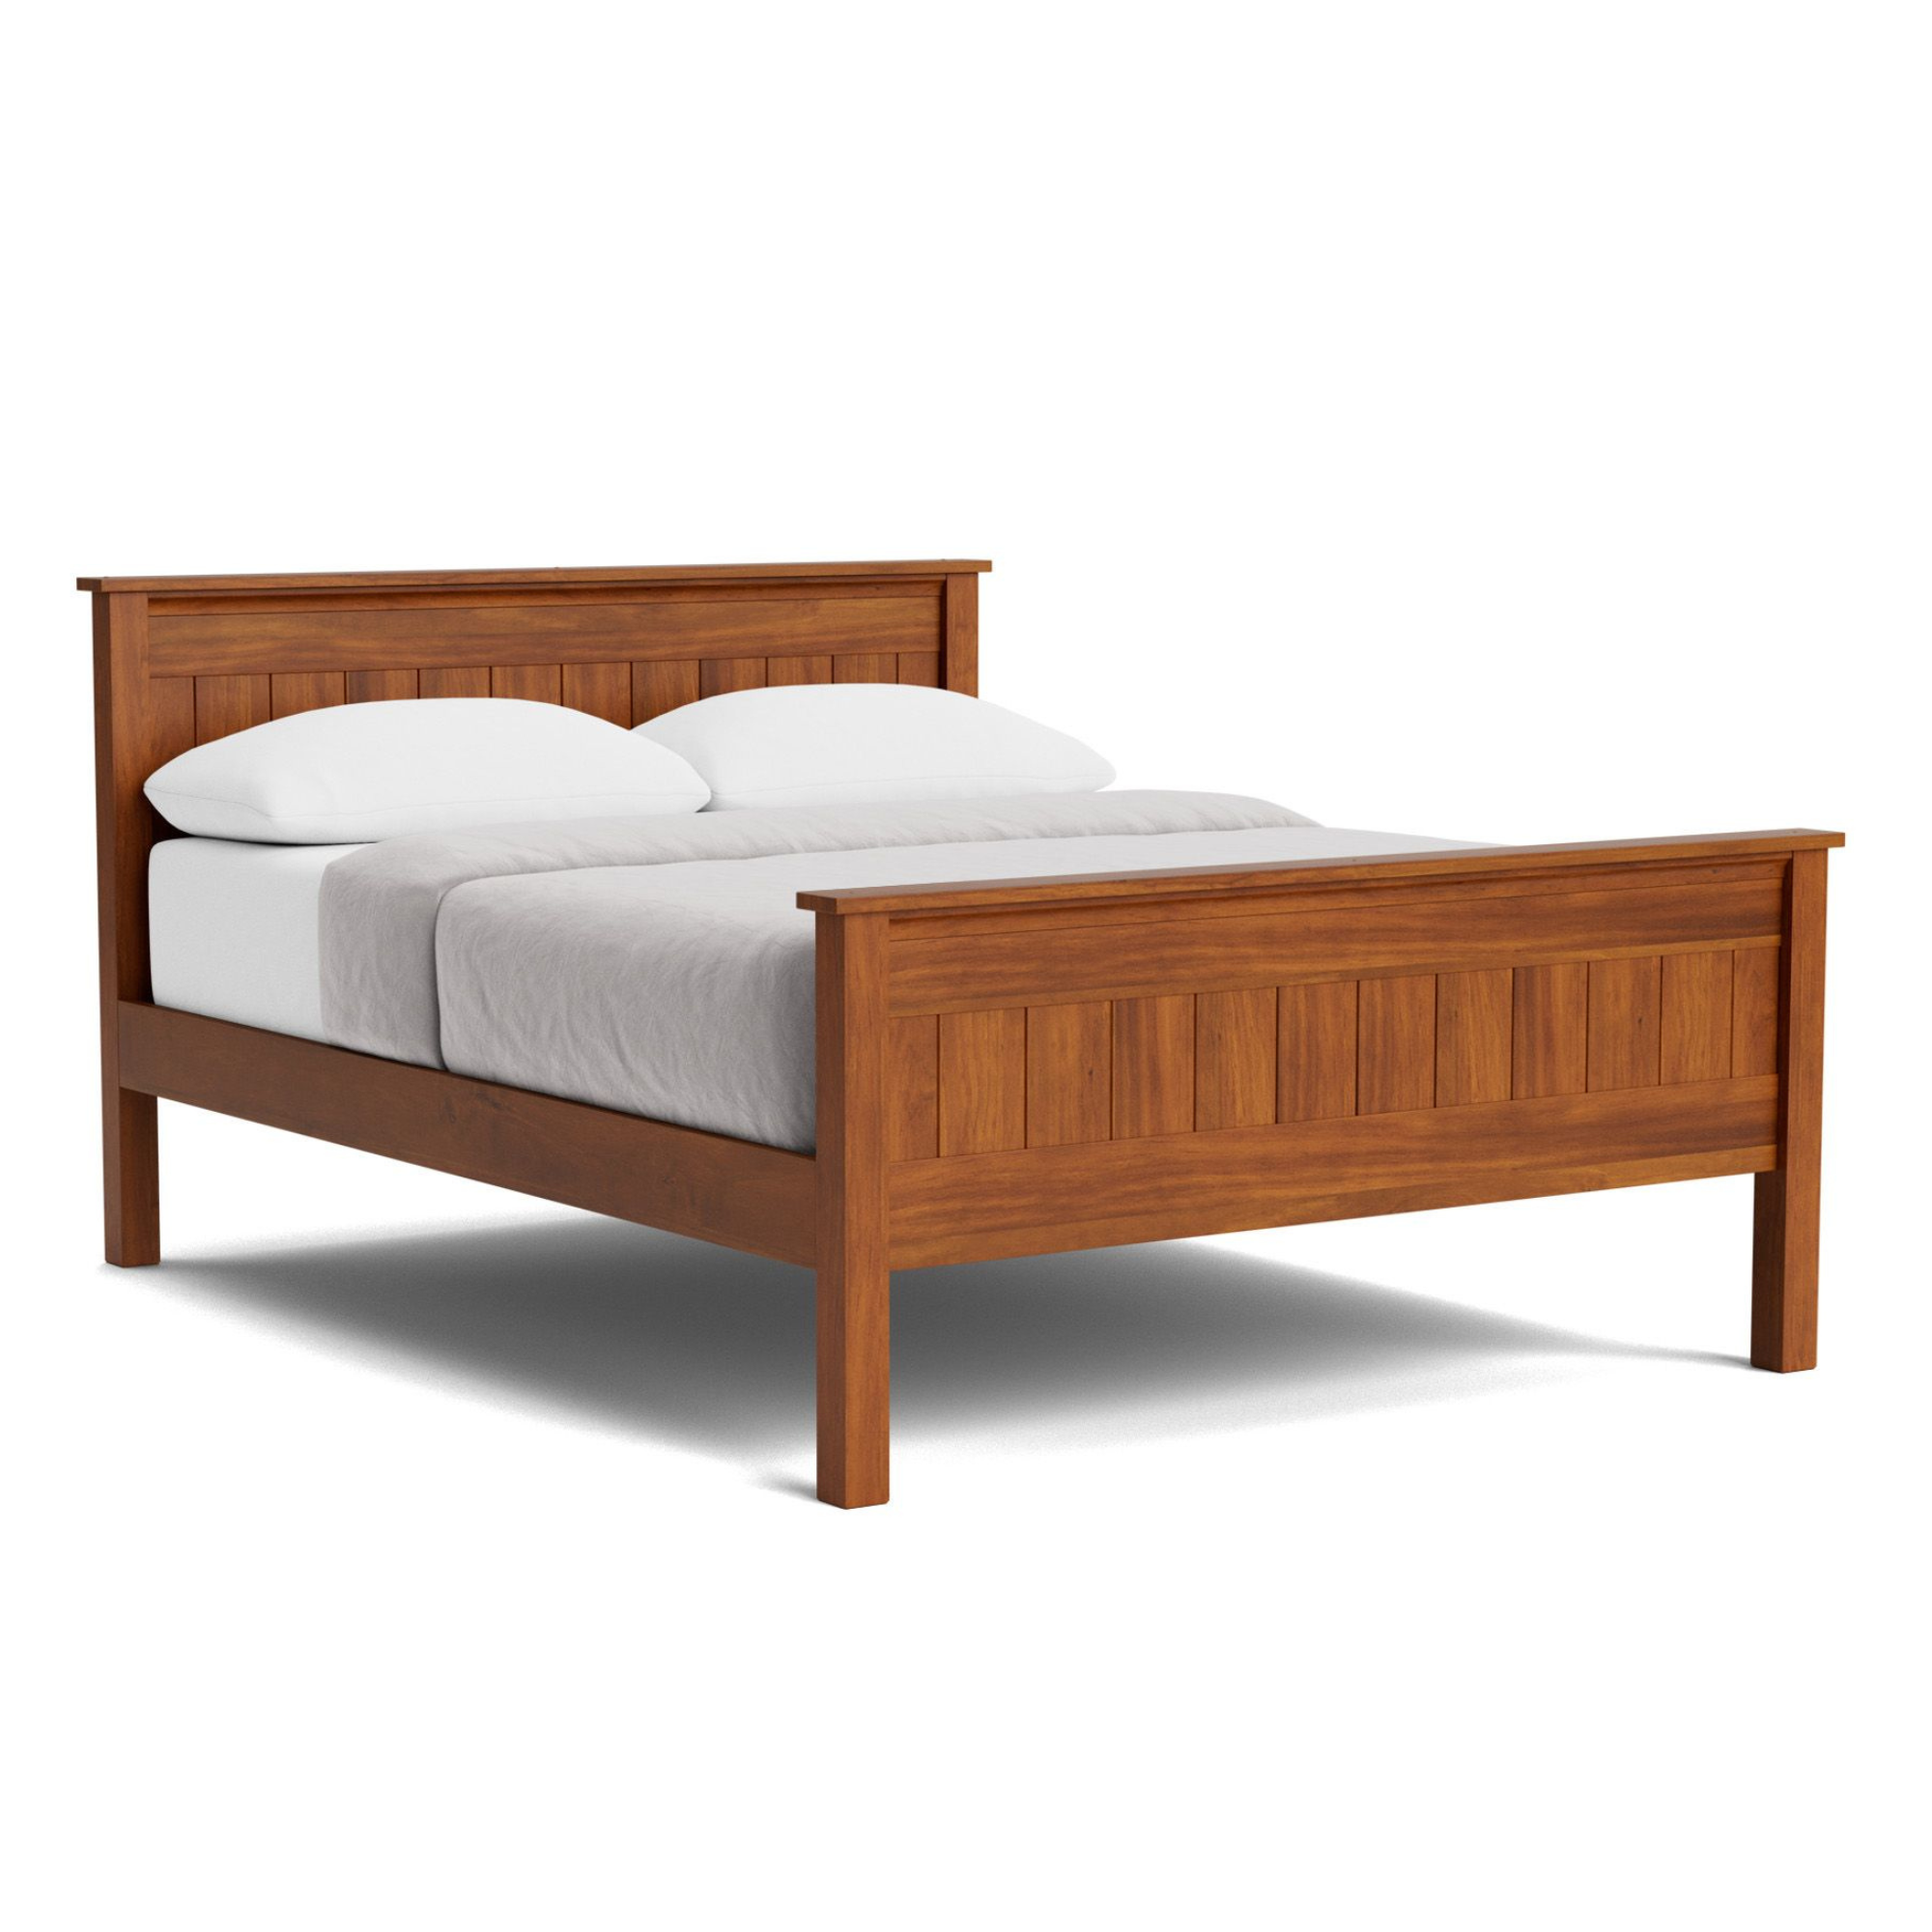 HILTON HIGH FOOT SLAT BED | ALL SIZES | NZ MADE